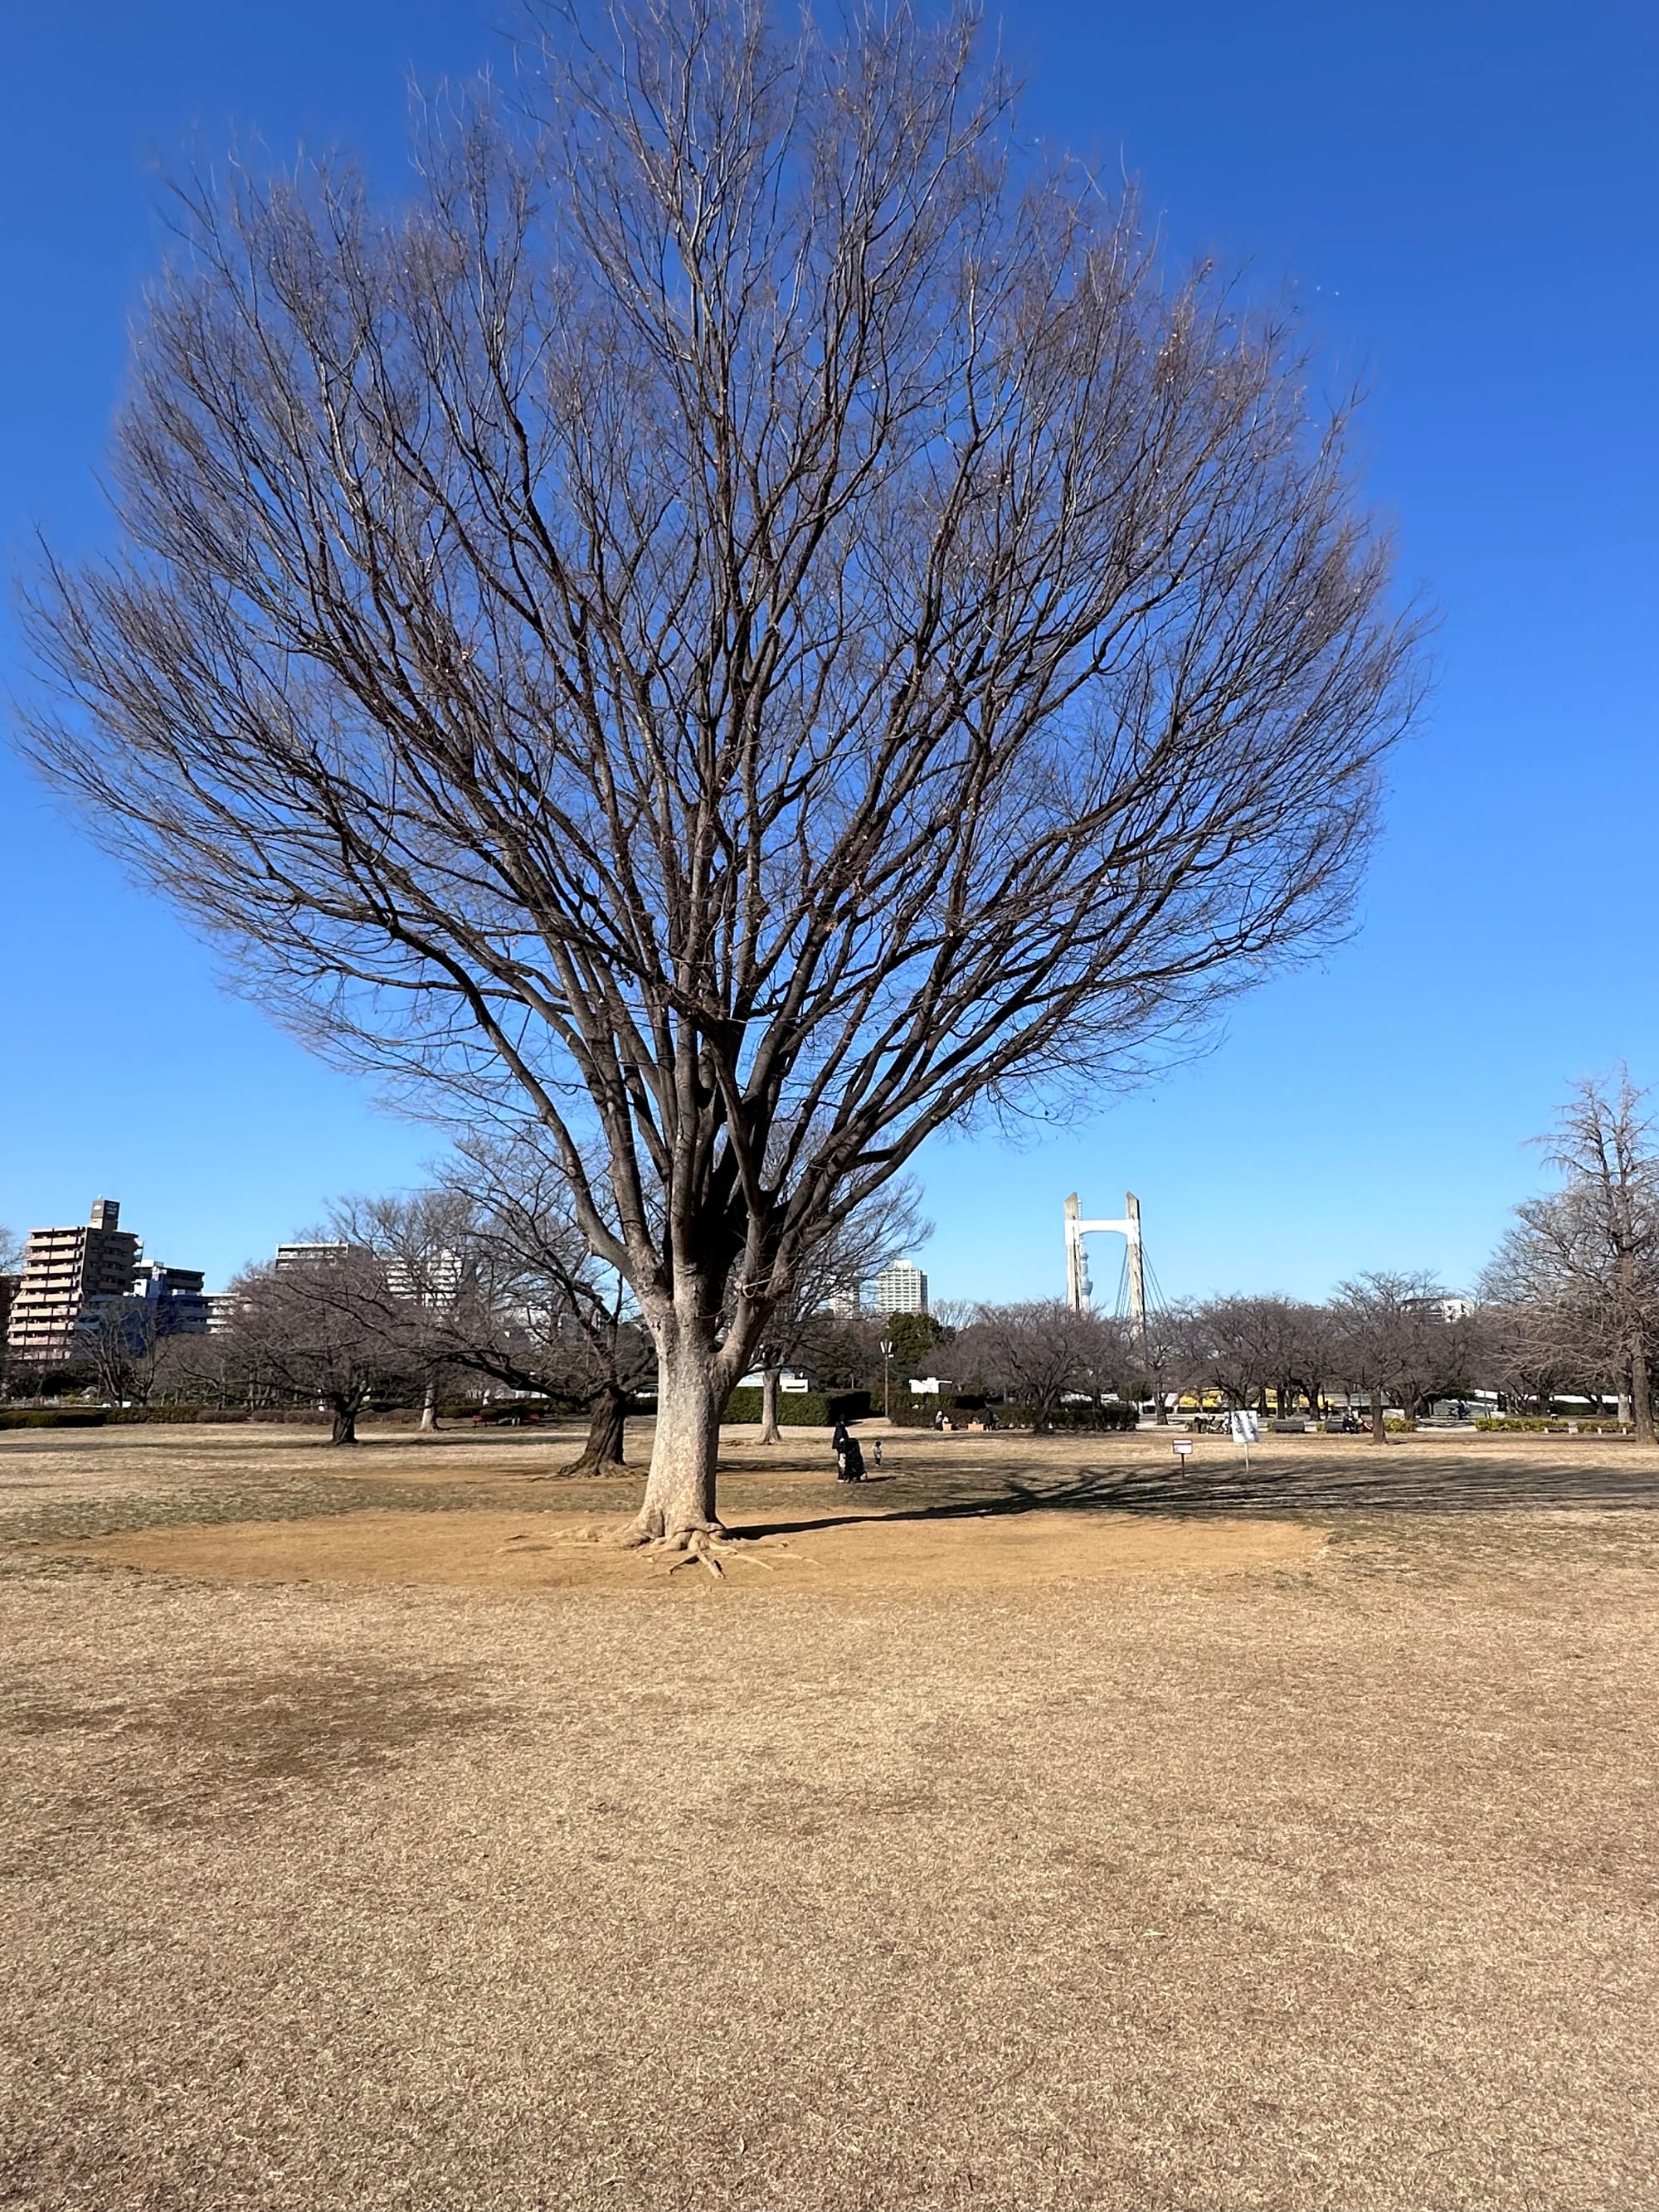 A large tree in Kiba Park. To the right of the tree is a space where a bench used to be.